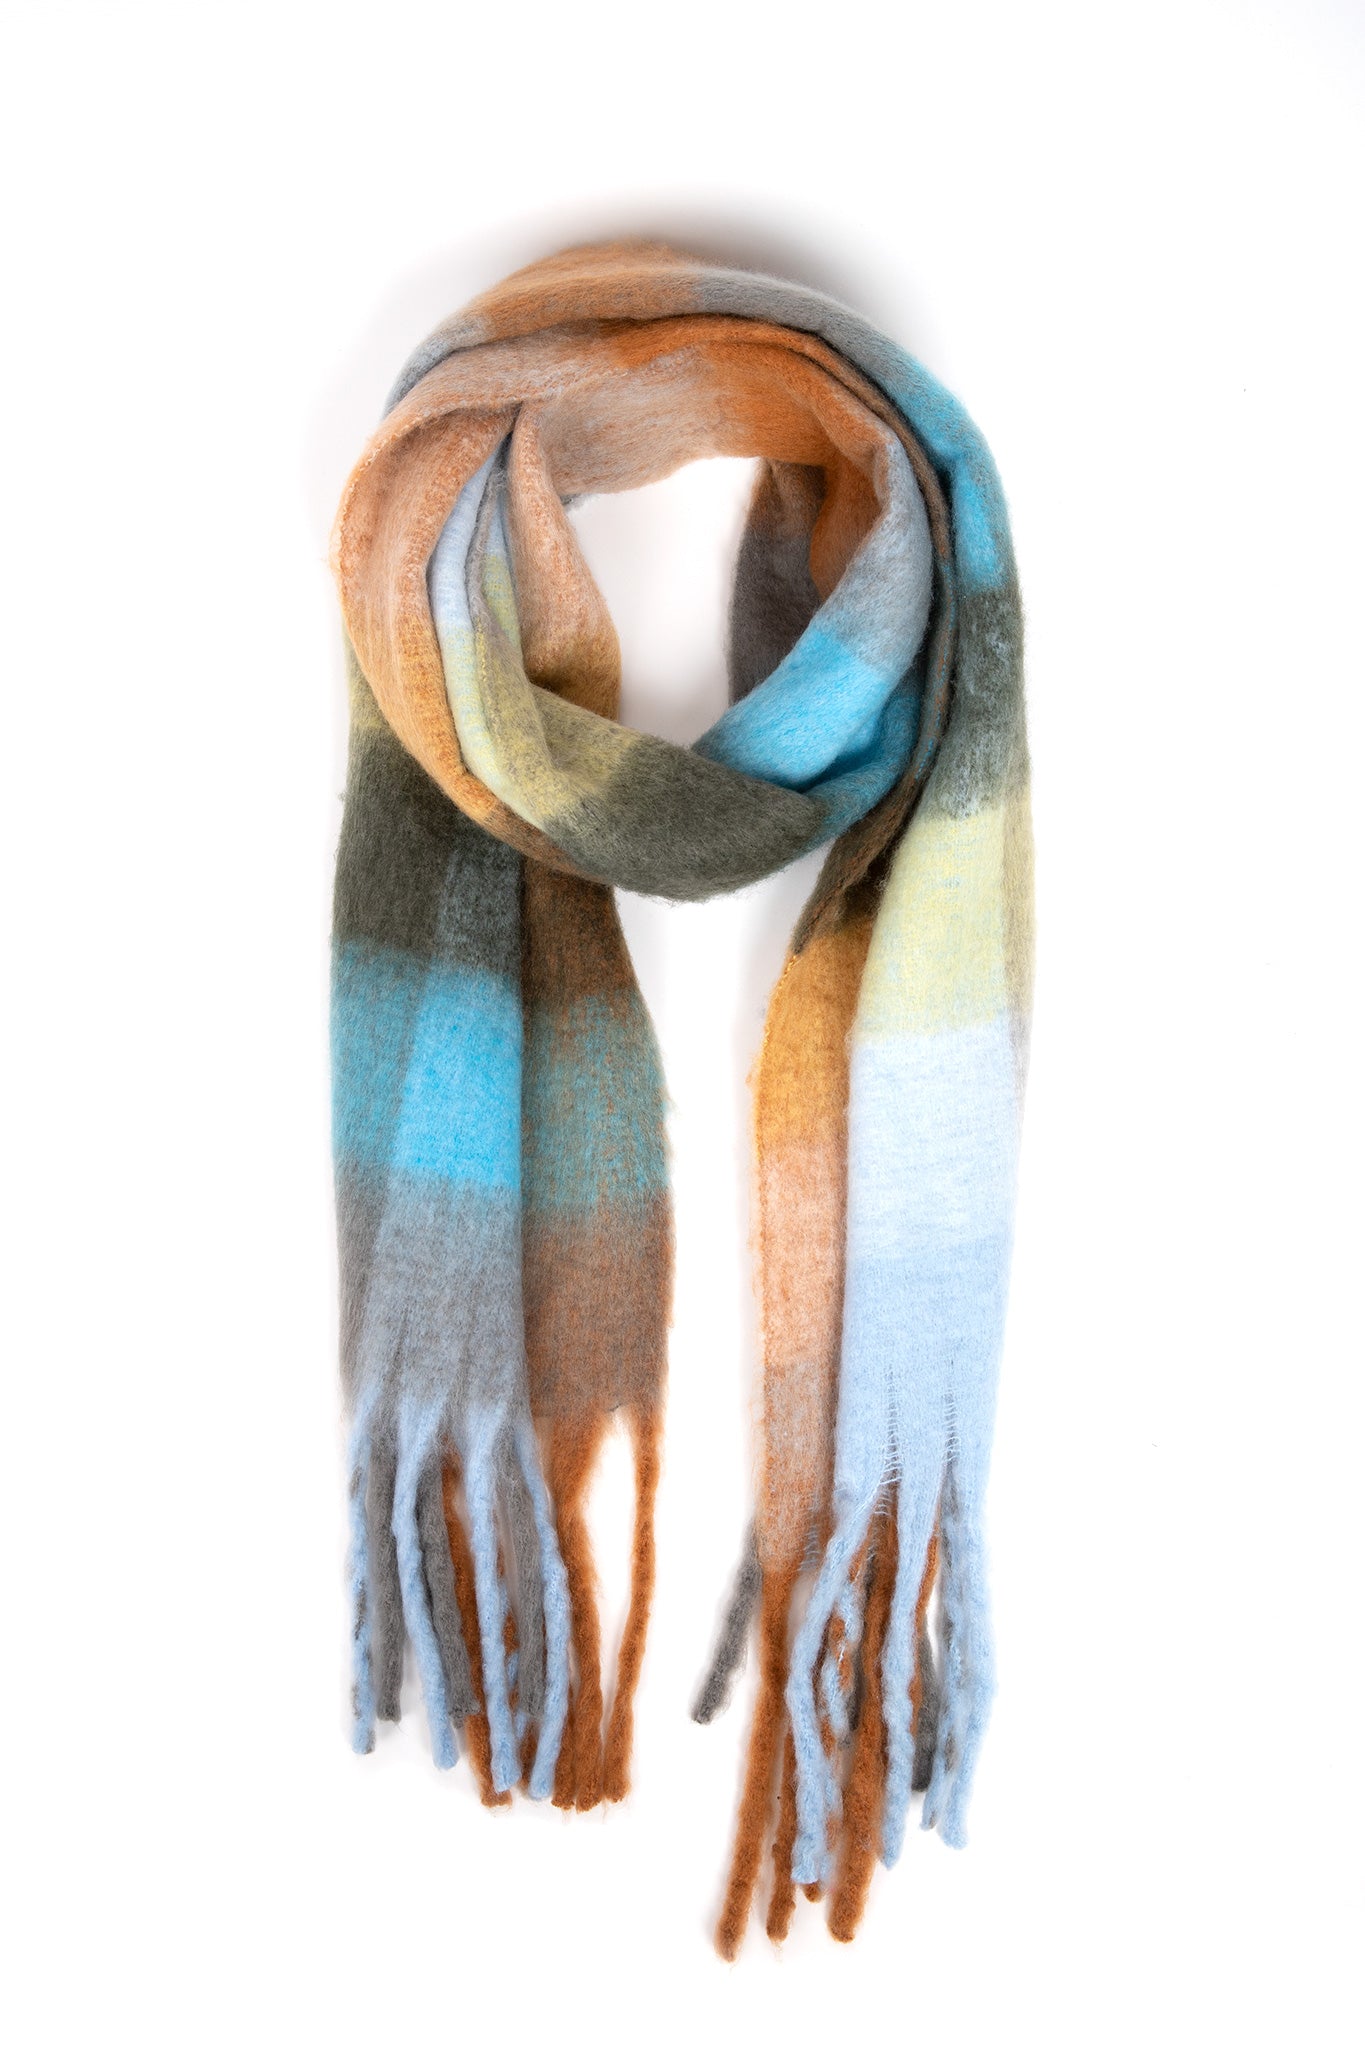    Lyla-Luxe-Check-Scarf-Teal-Brown